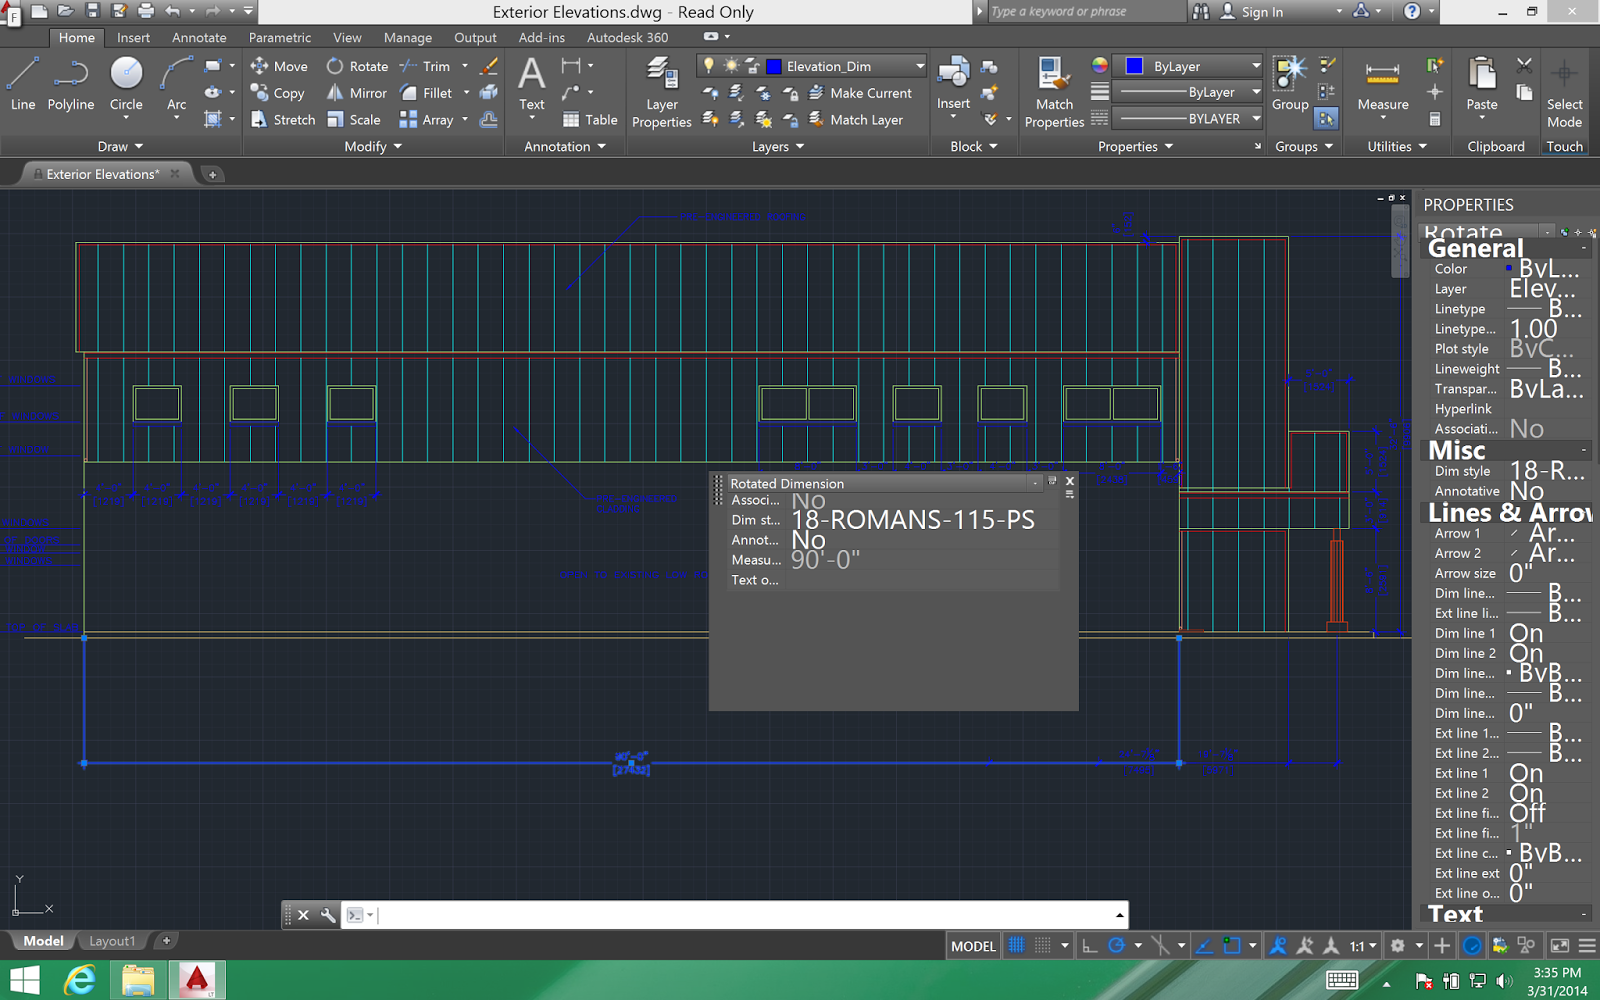 autodesk autocad 2015 system requirements